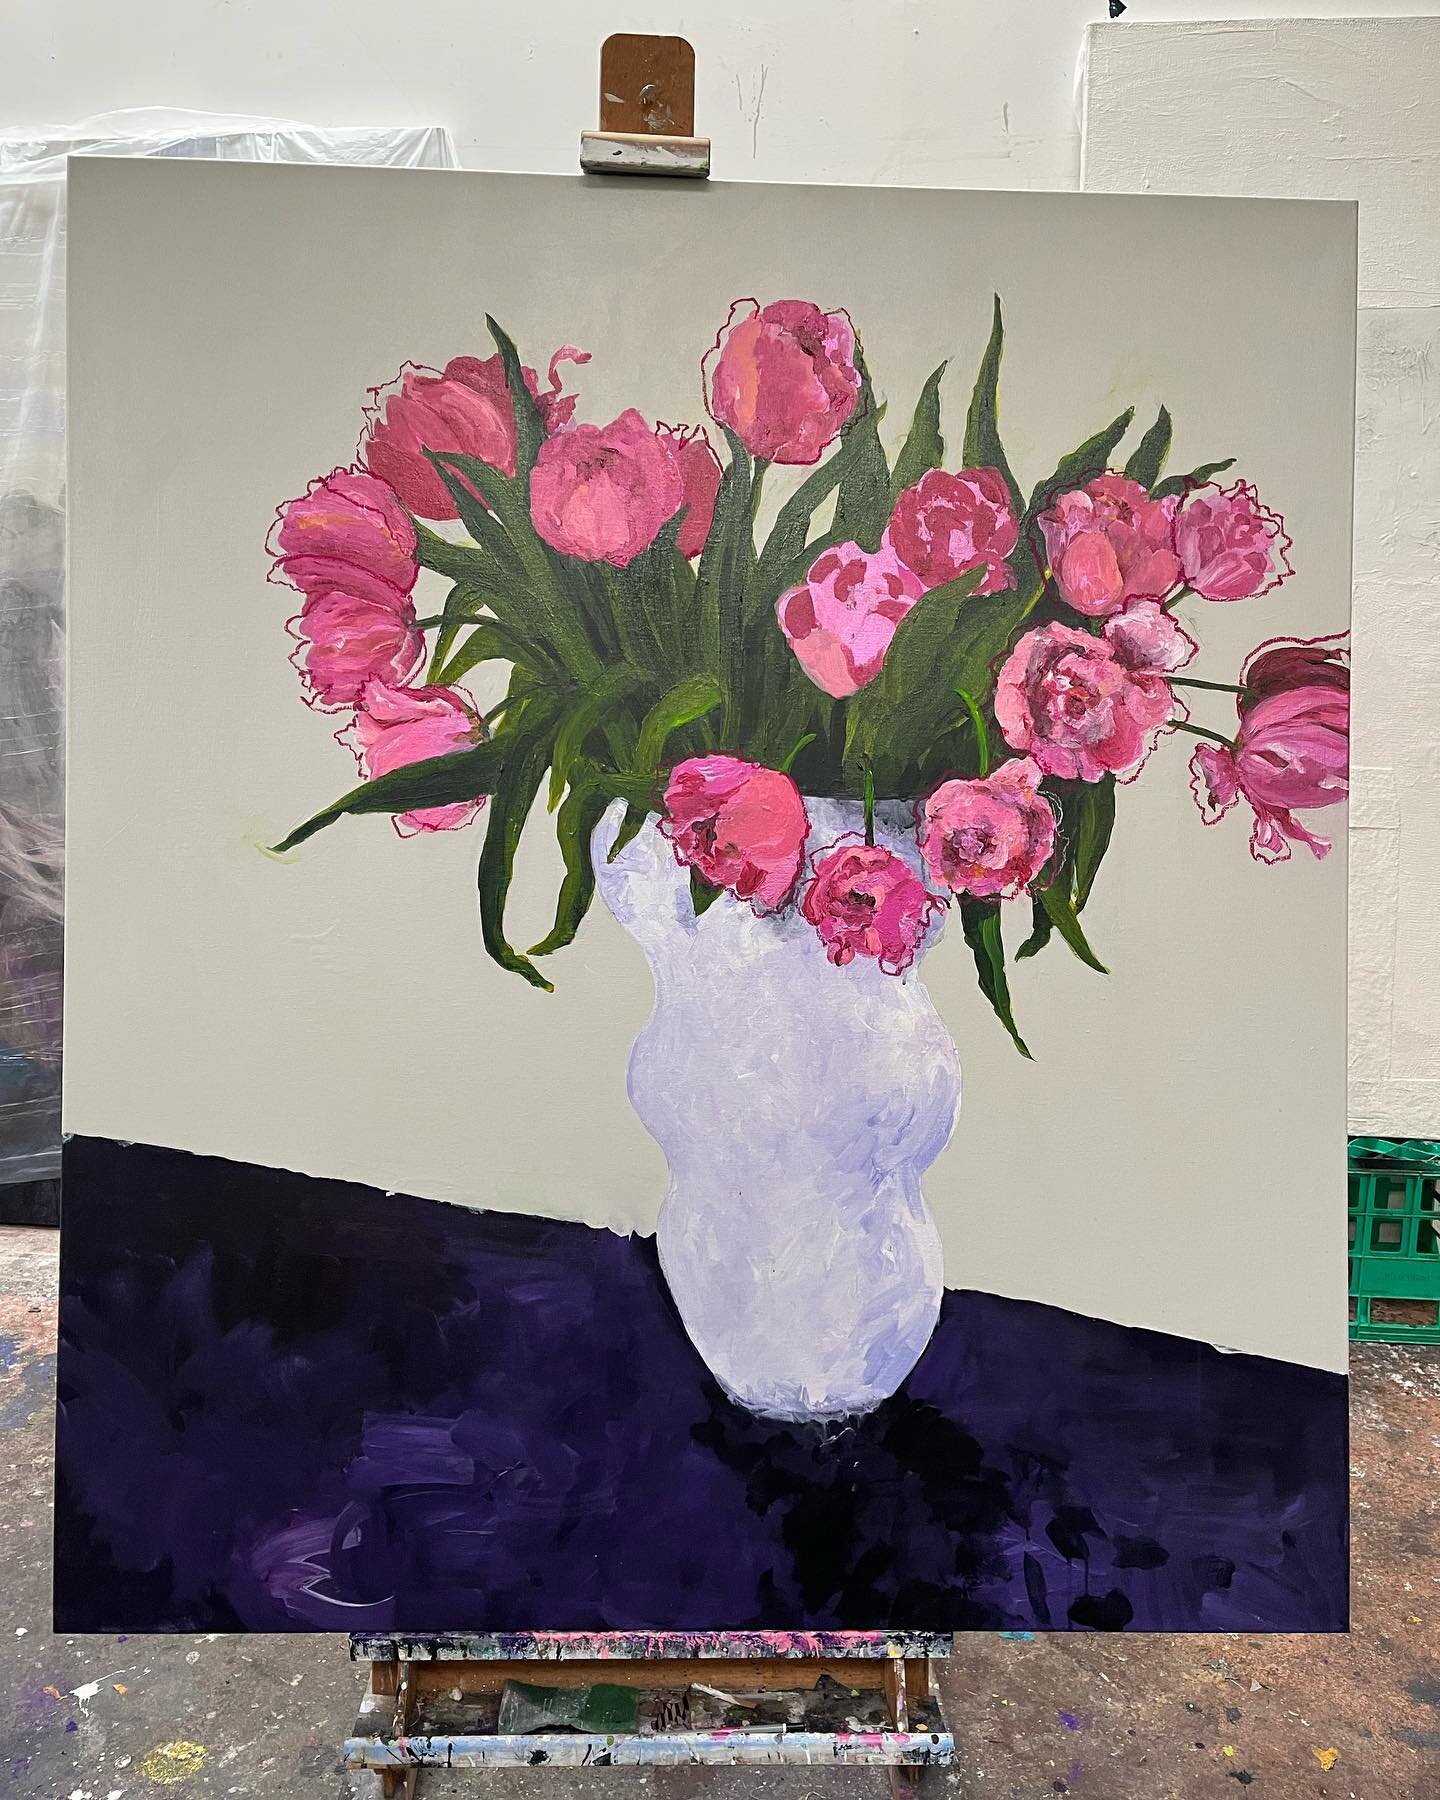 &hellip;almost finished!
#stilllife #colour #melbourneartist #acrylicpainting